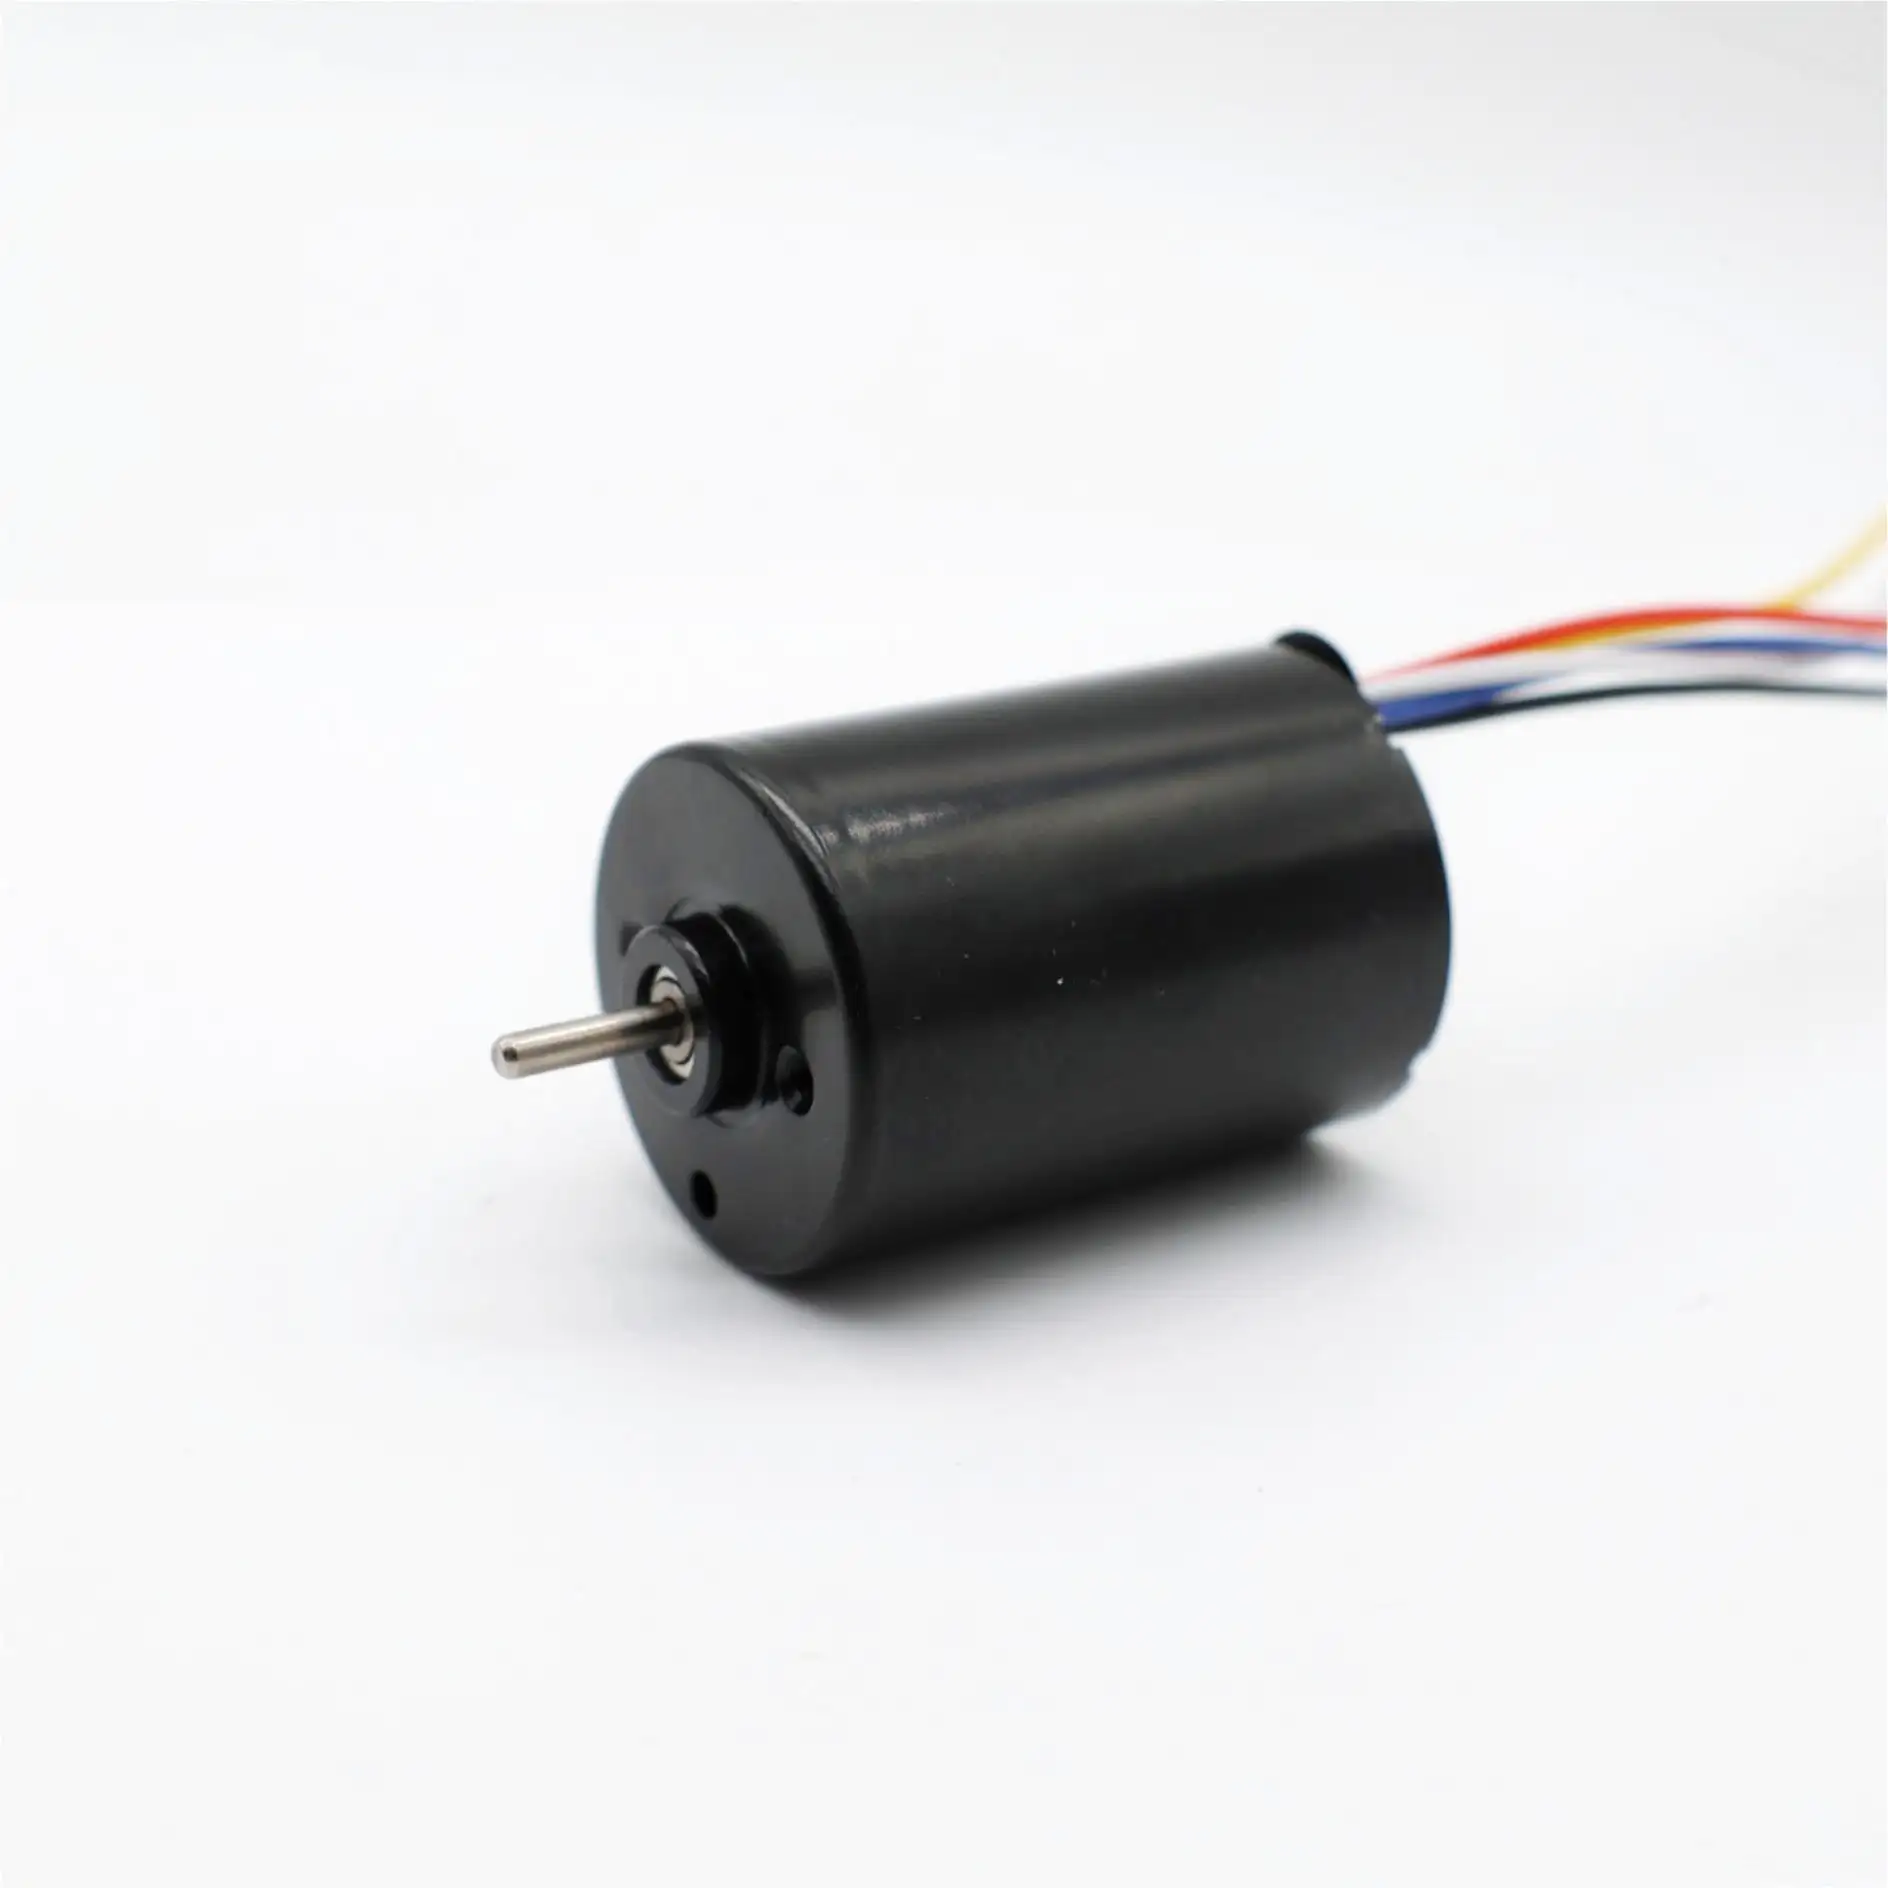 Long Lifespan High Rotaional Speed High Torque BLDC Motor 28mm*38mm Small DC Motor with Drive Encoder For Fan